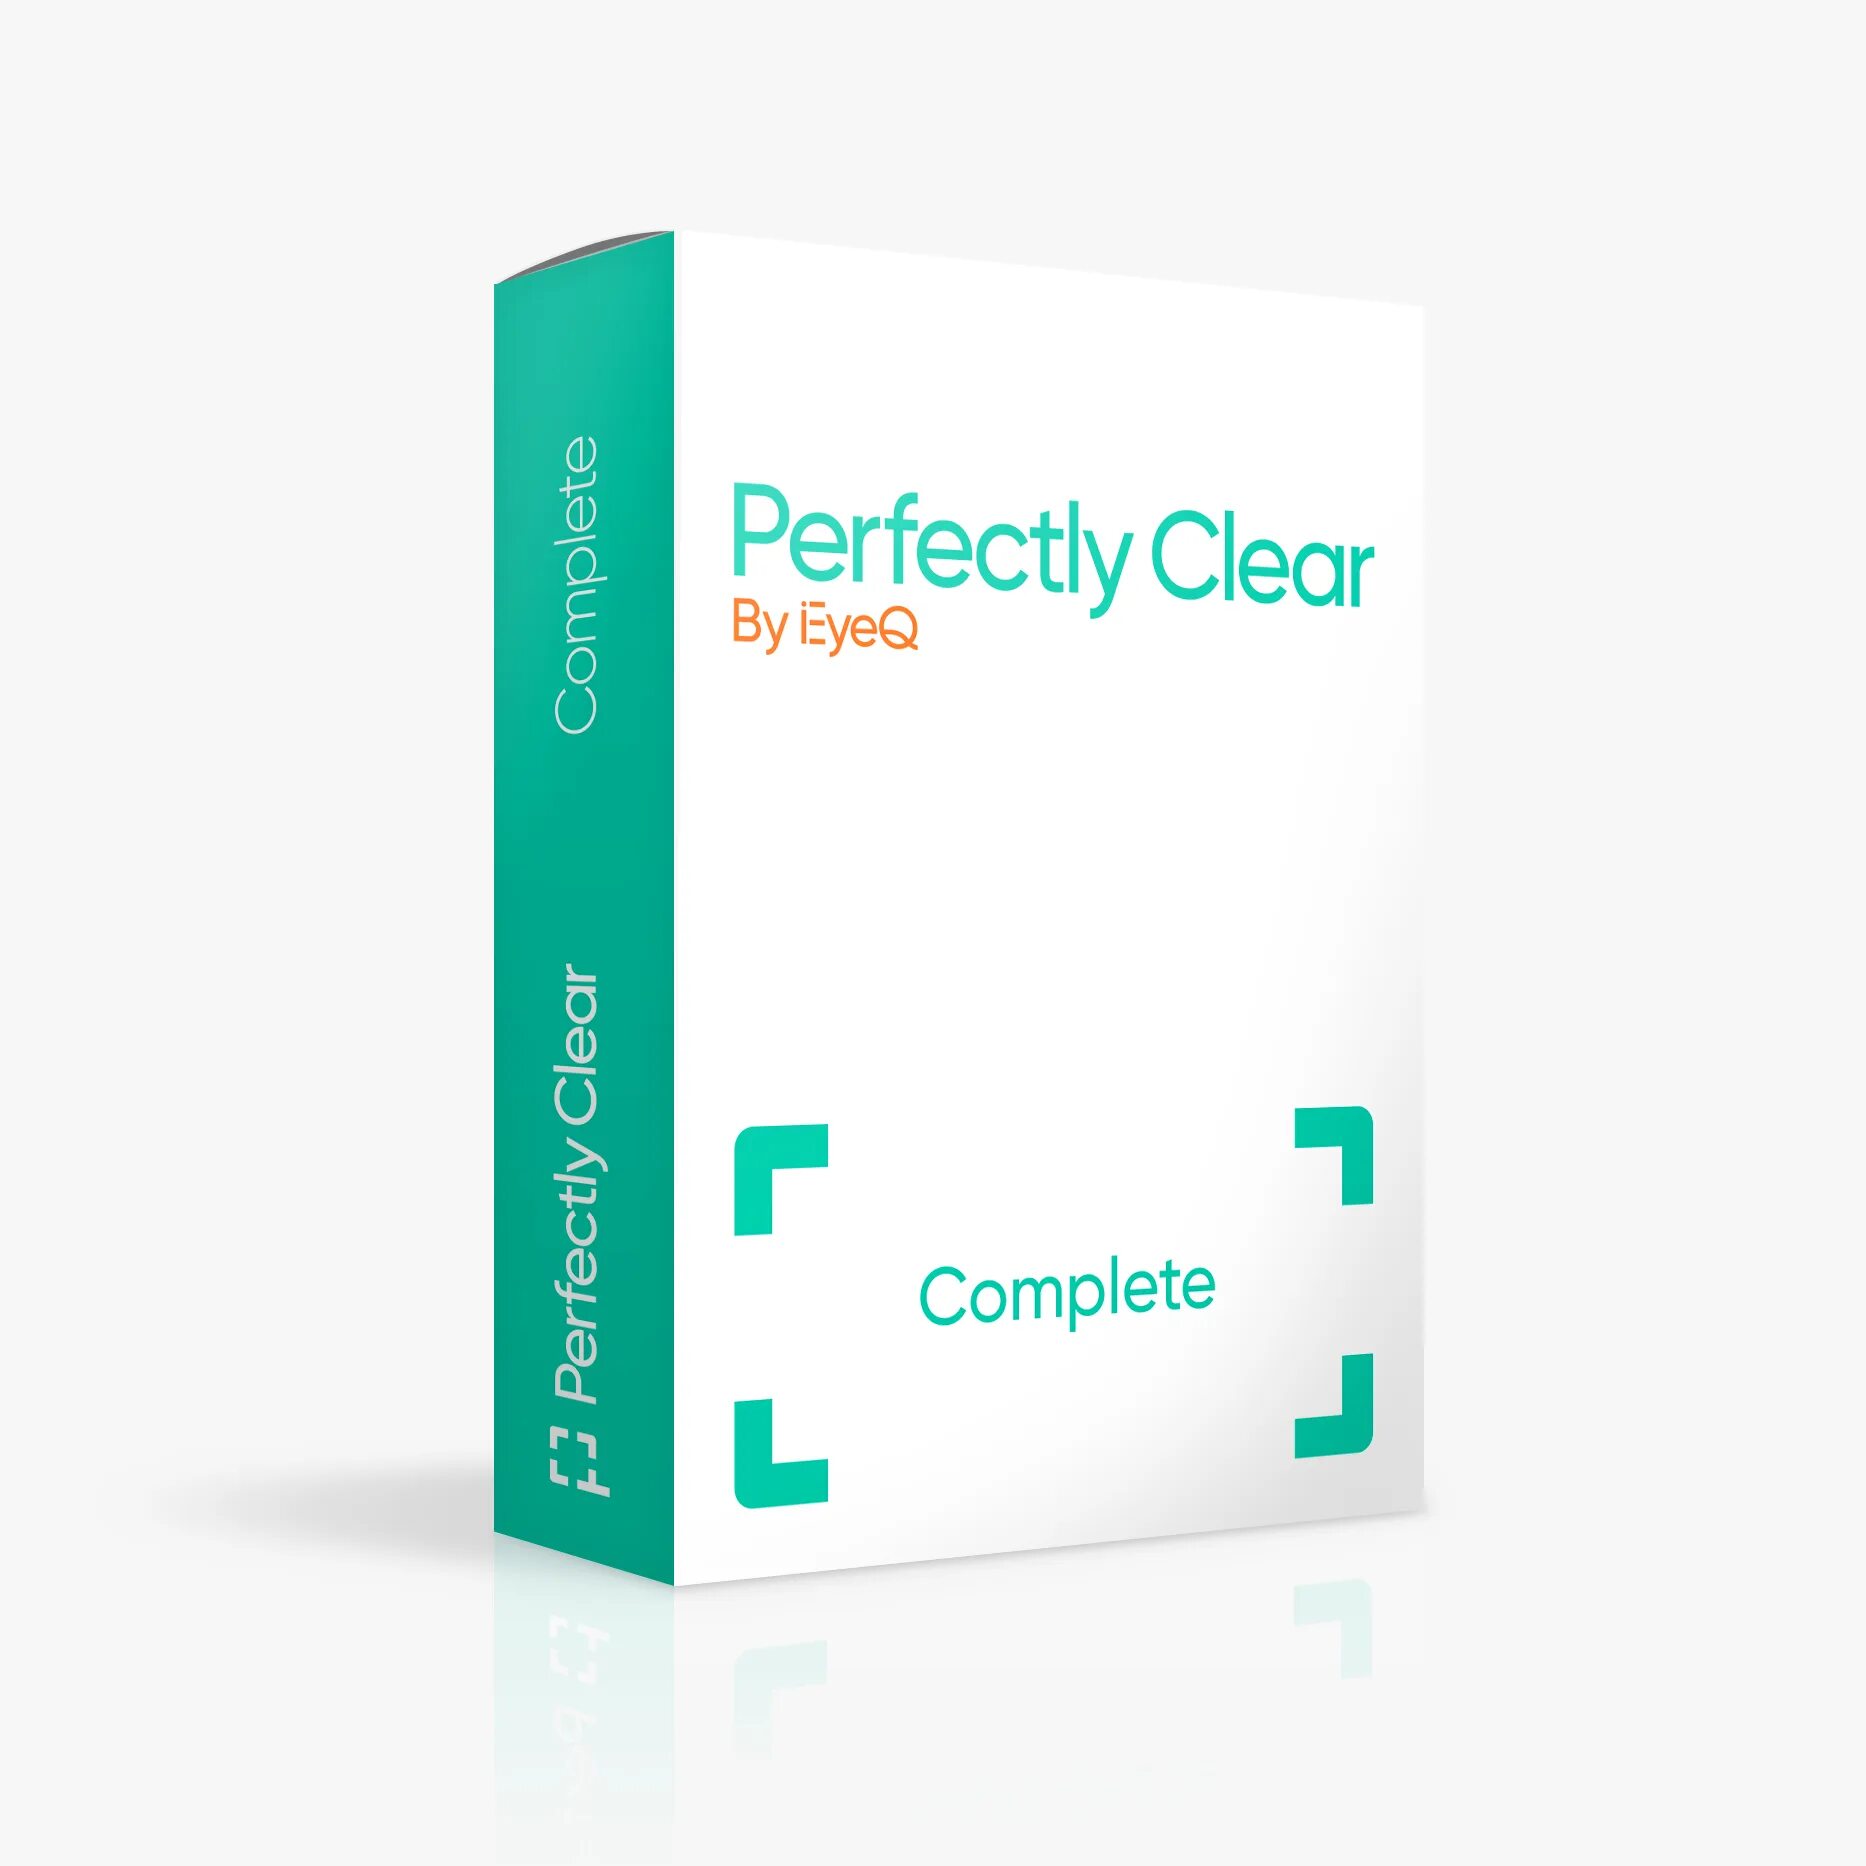 Clear users. Perfectly Clear complete. Athentech perfectly Clear. Perfectly Clear v3 это. Perfectly.